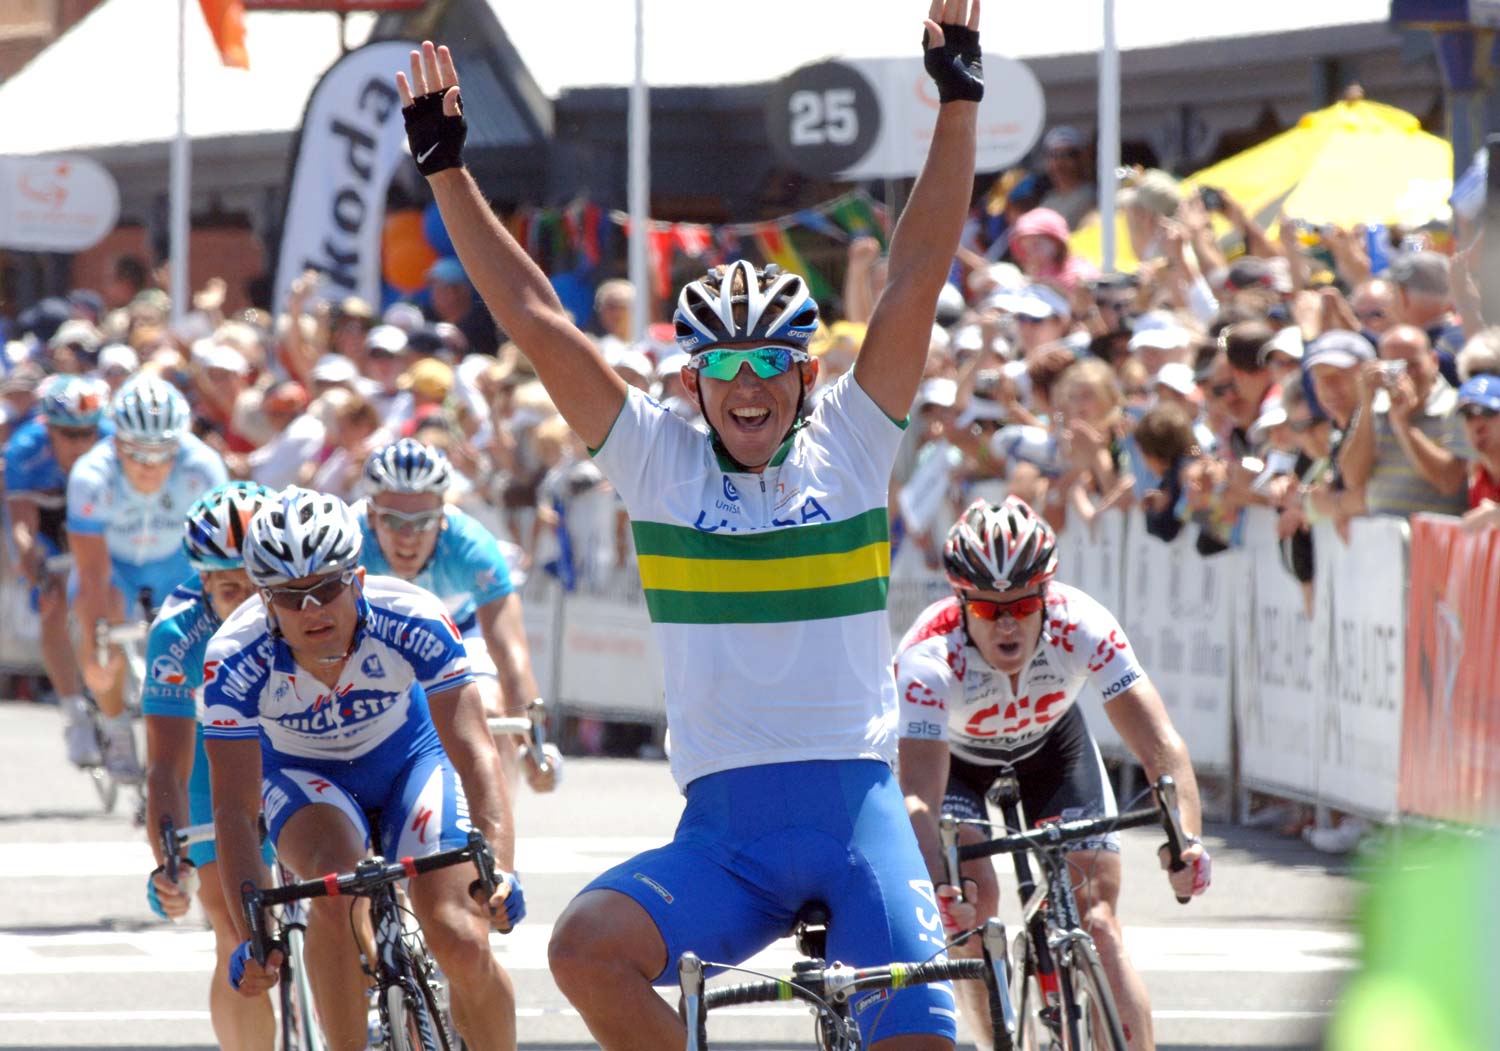 Allan Davis contested every Tour Down Under from when he was an 18-year-old in 1999 through to 2009 when he won the title. Here he wins a stage in 2008 as part of the composite UniSA team. Photo: Graham Watson